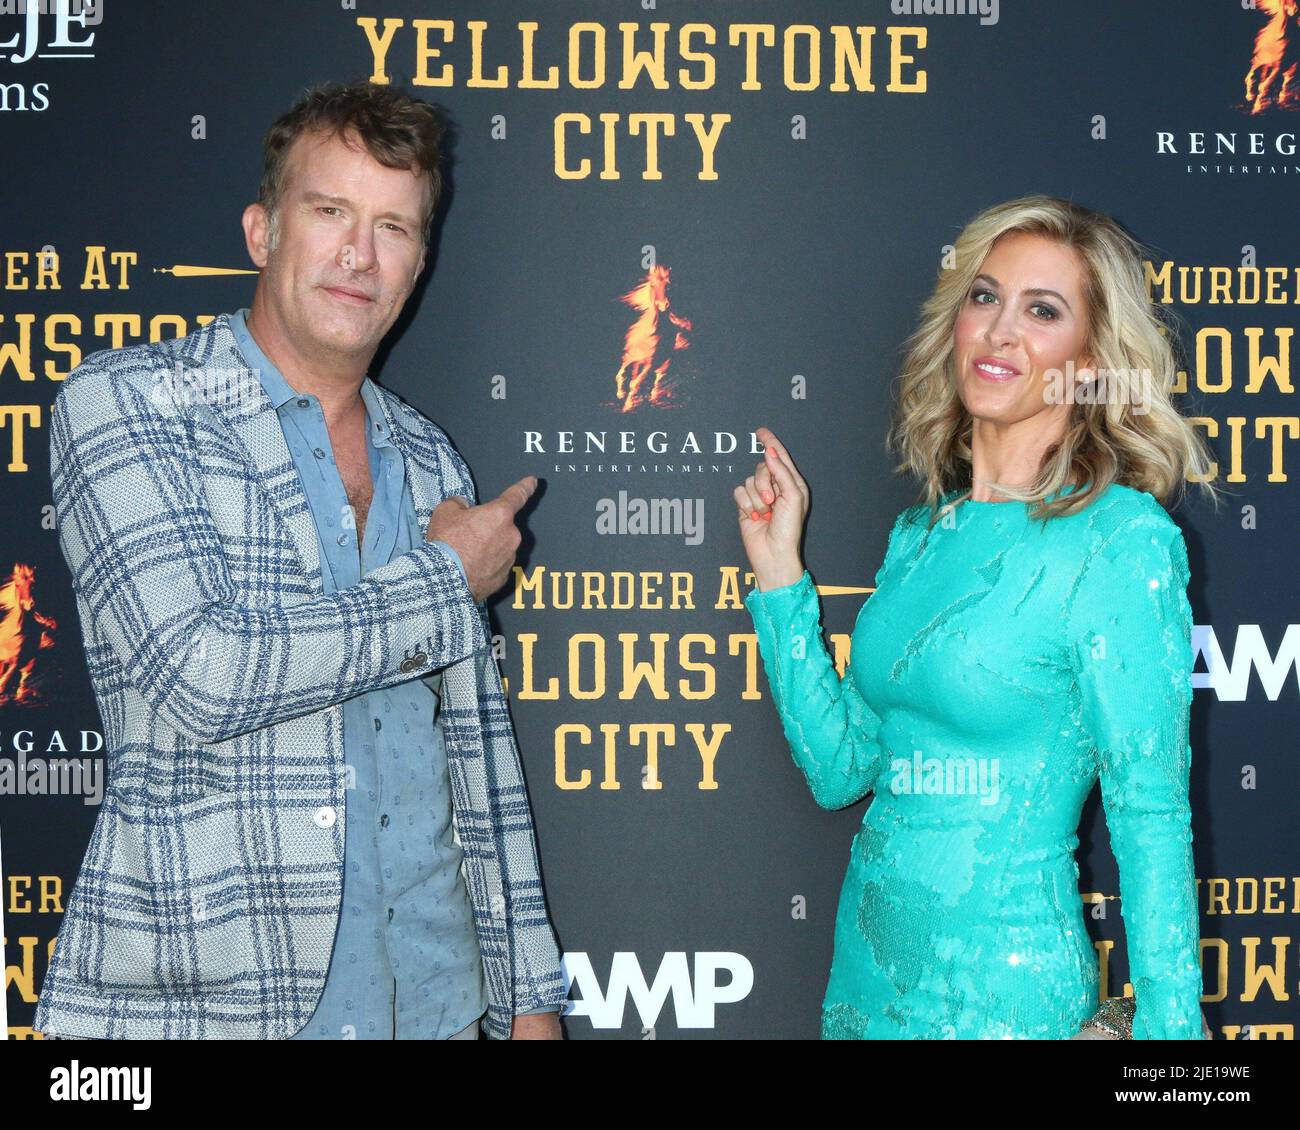 Los Angeles, CA. 23rd June, 2022. Thomas Jane, Courtney Lauren Penn at arrivals for MURDER AT YELLOWSTONE CITY Premiere, Harmony Gold Theater, Los Angeles, CA June 23, 2022. Credit: Priscilla Grant/Everett Collection/Alamy Live News Stock Photo